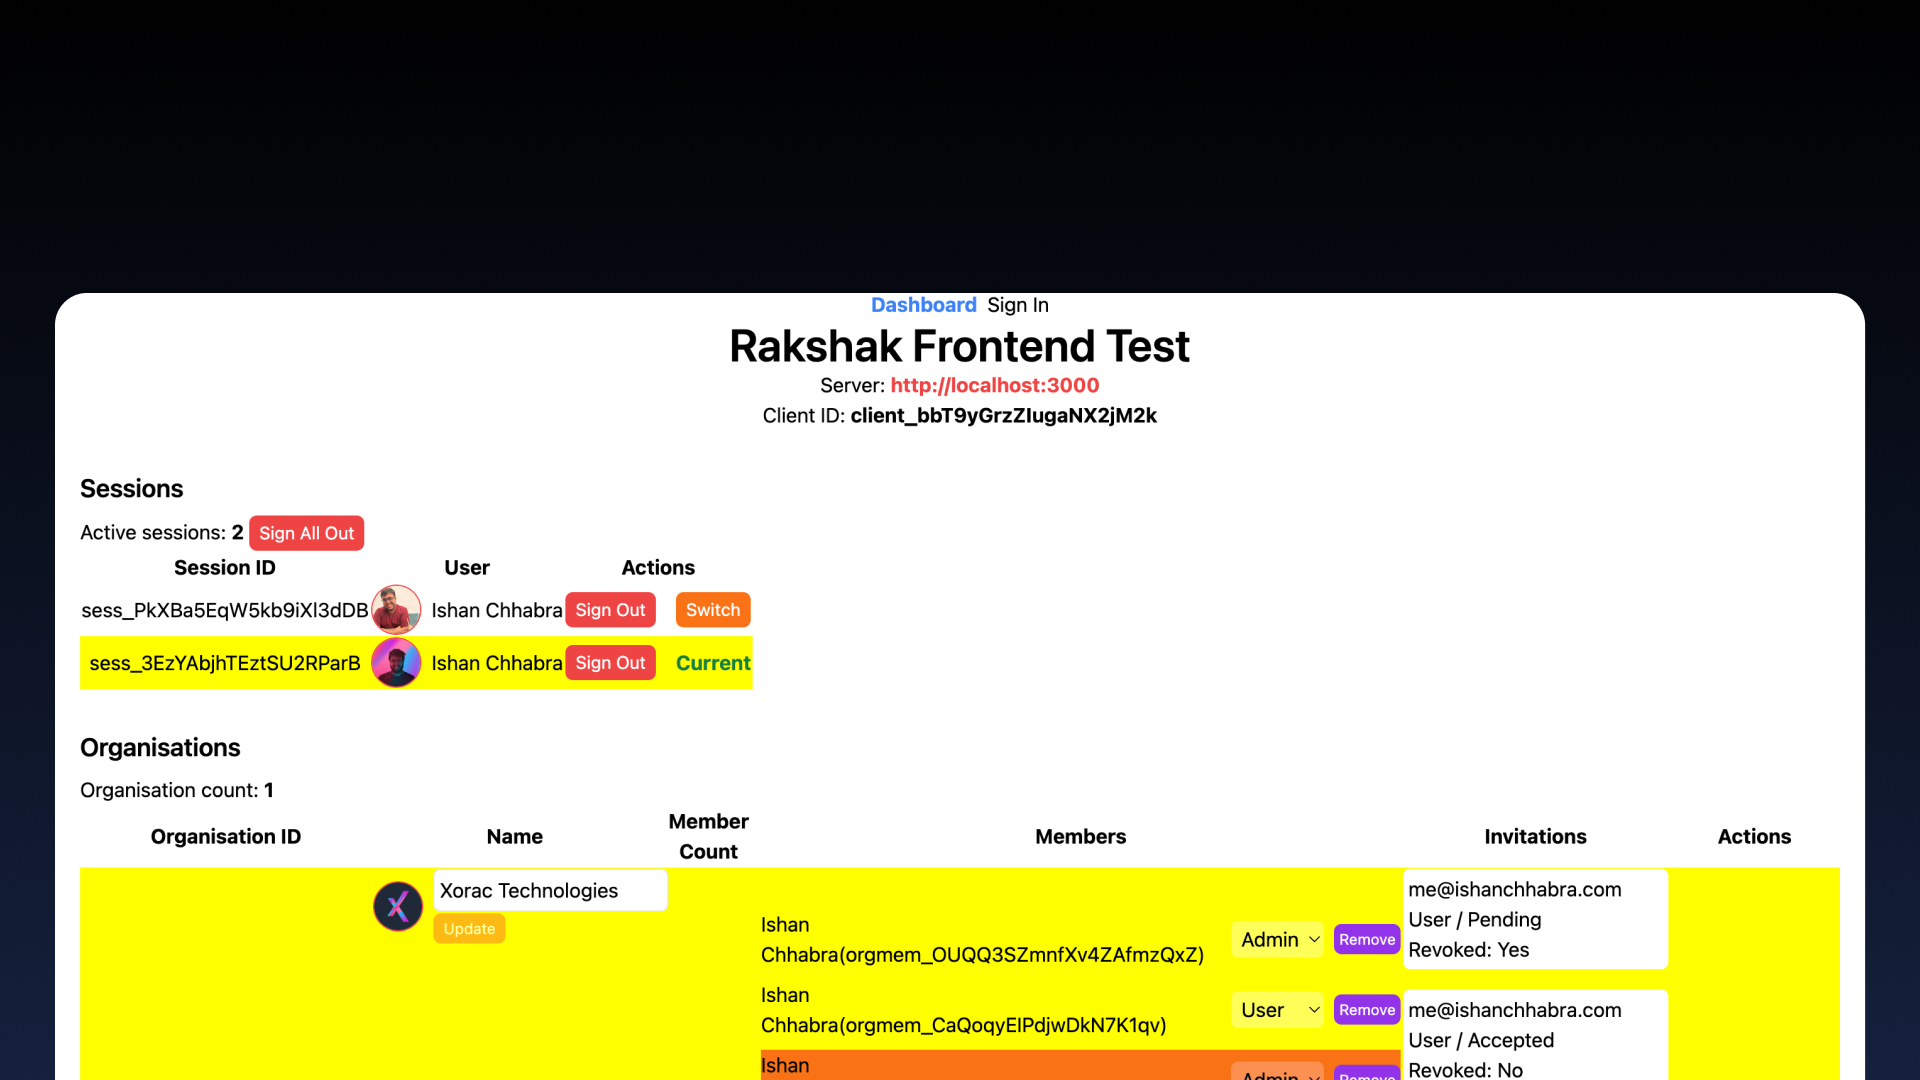 A Rakshak test frontend showcasing multiple sessions and their organisations - along with an option to switch!